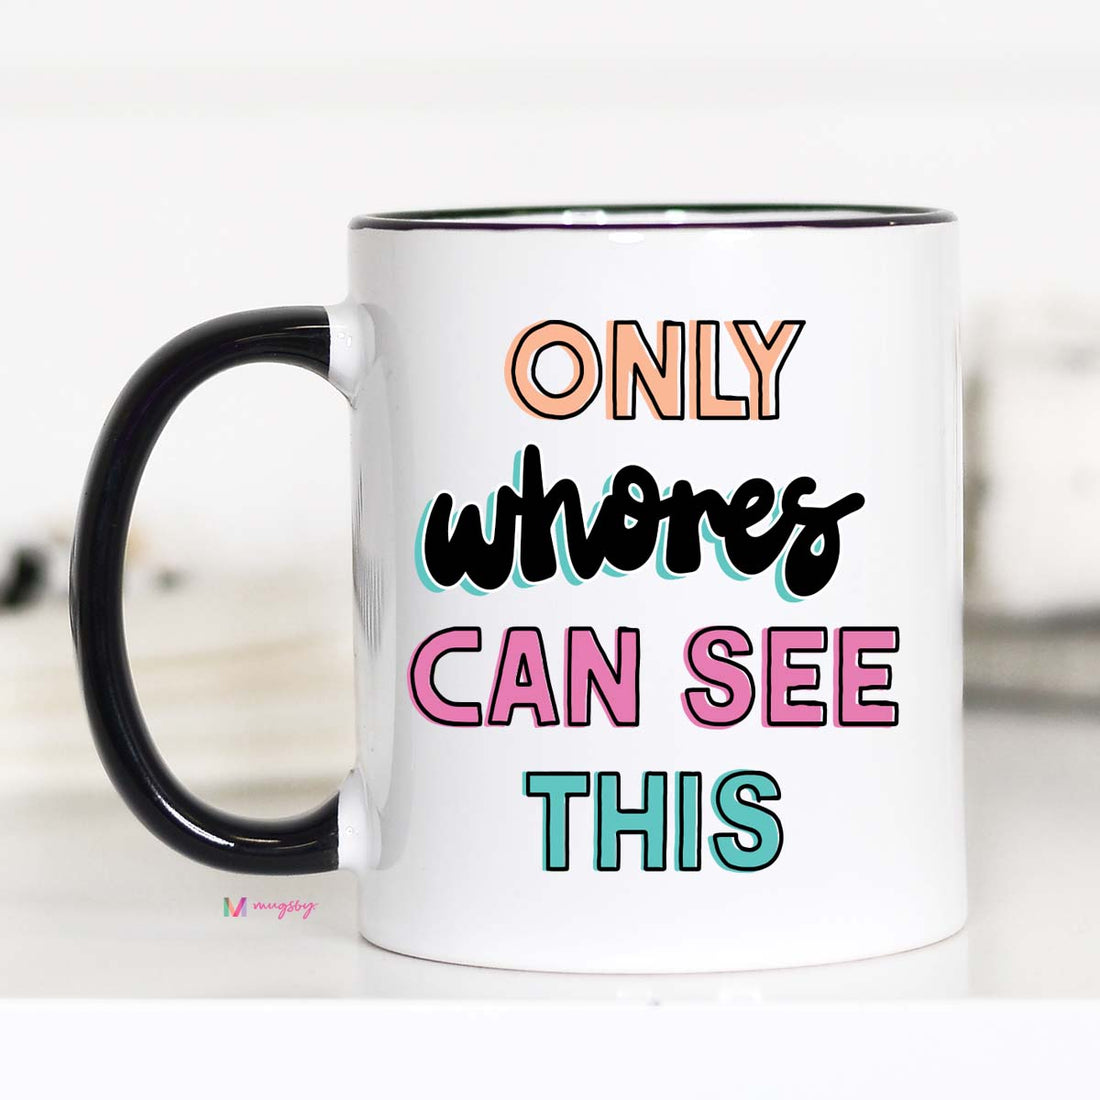 Only Whores Can See This Coffee Mug